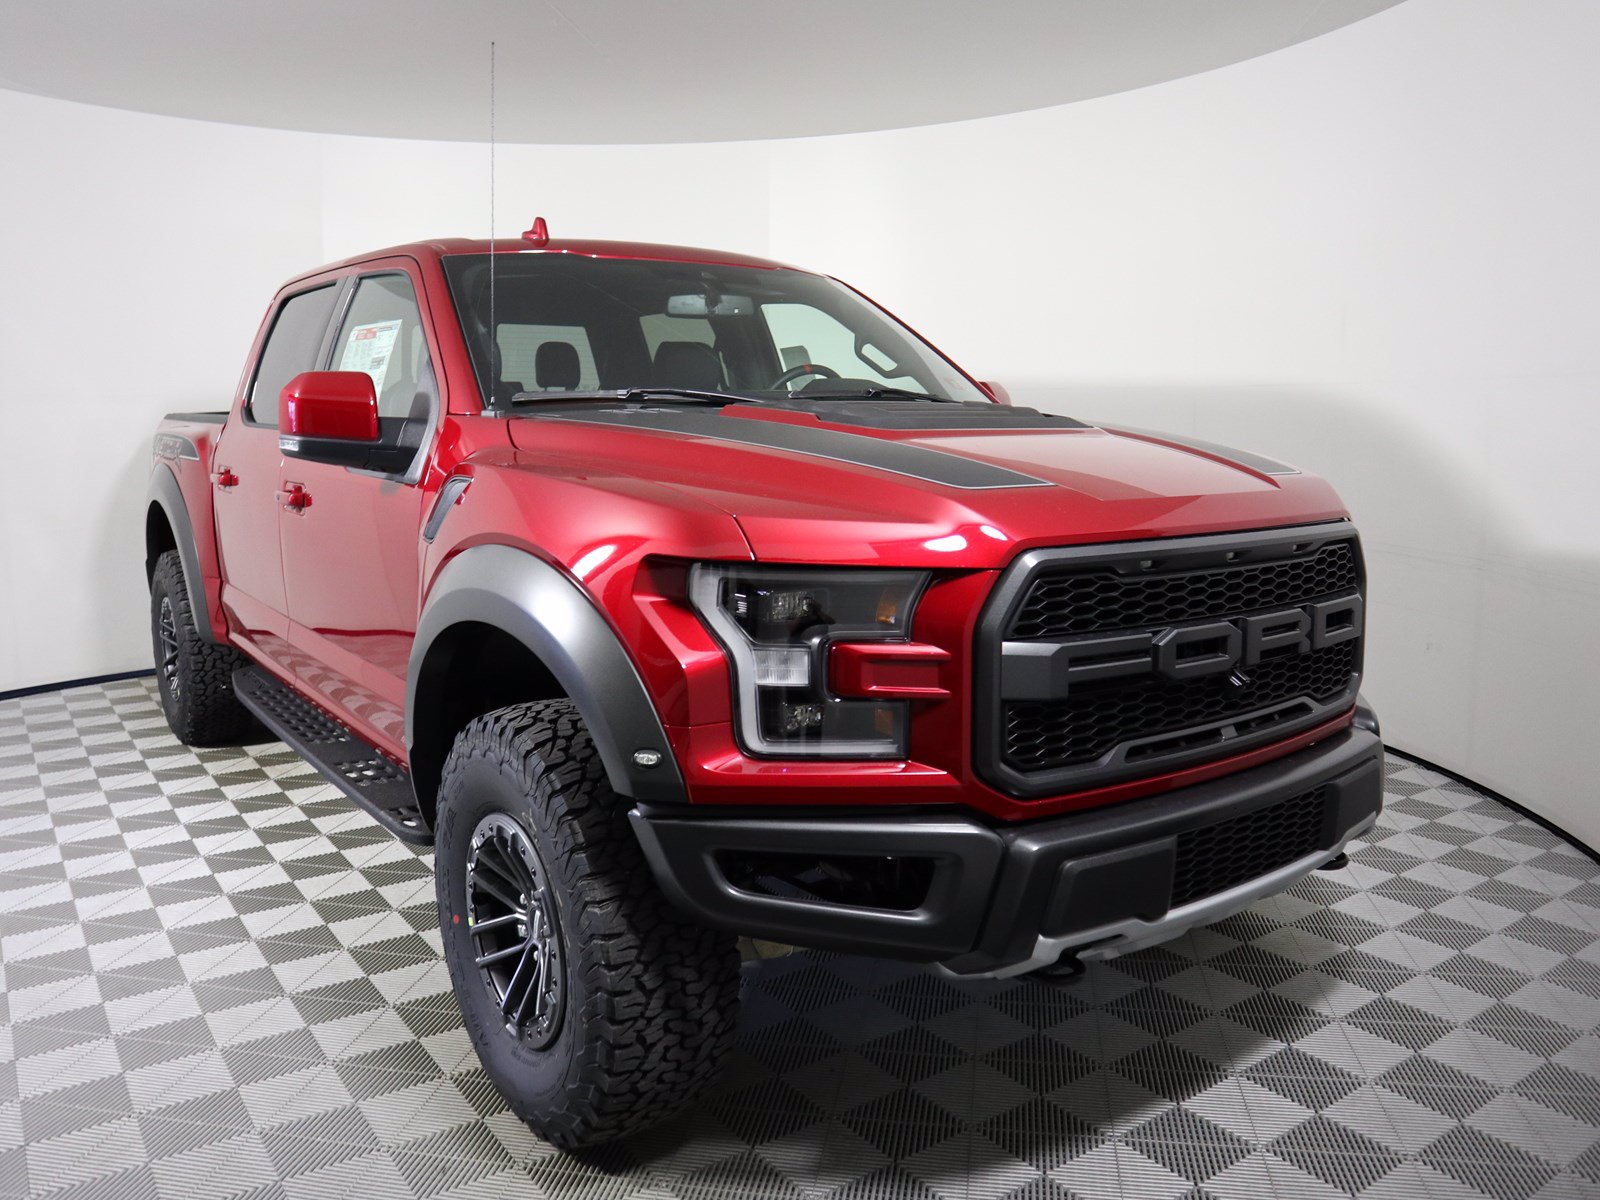 New 2020 Ford F-150 Raptor Crew Cab Pickup in Parkersburg #F19901 ...